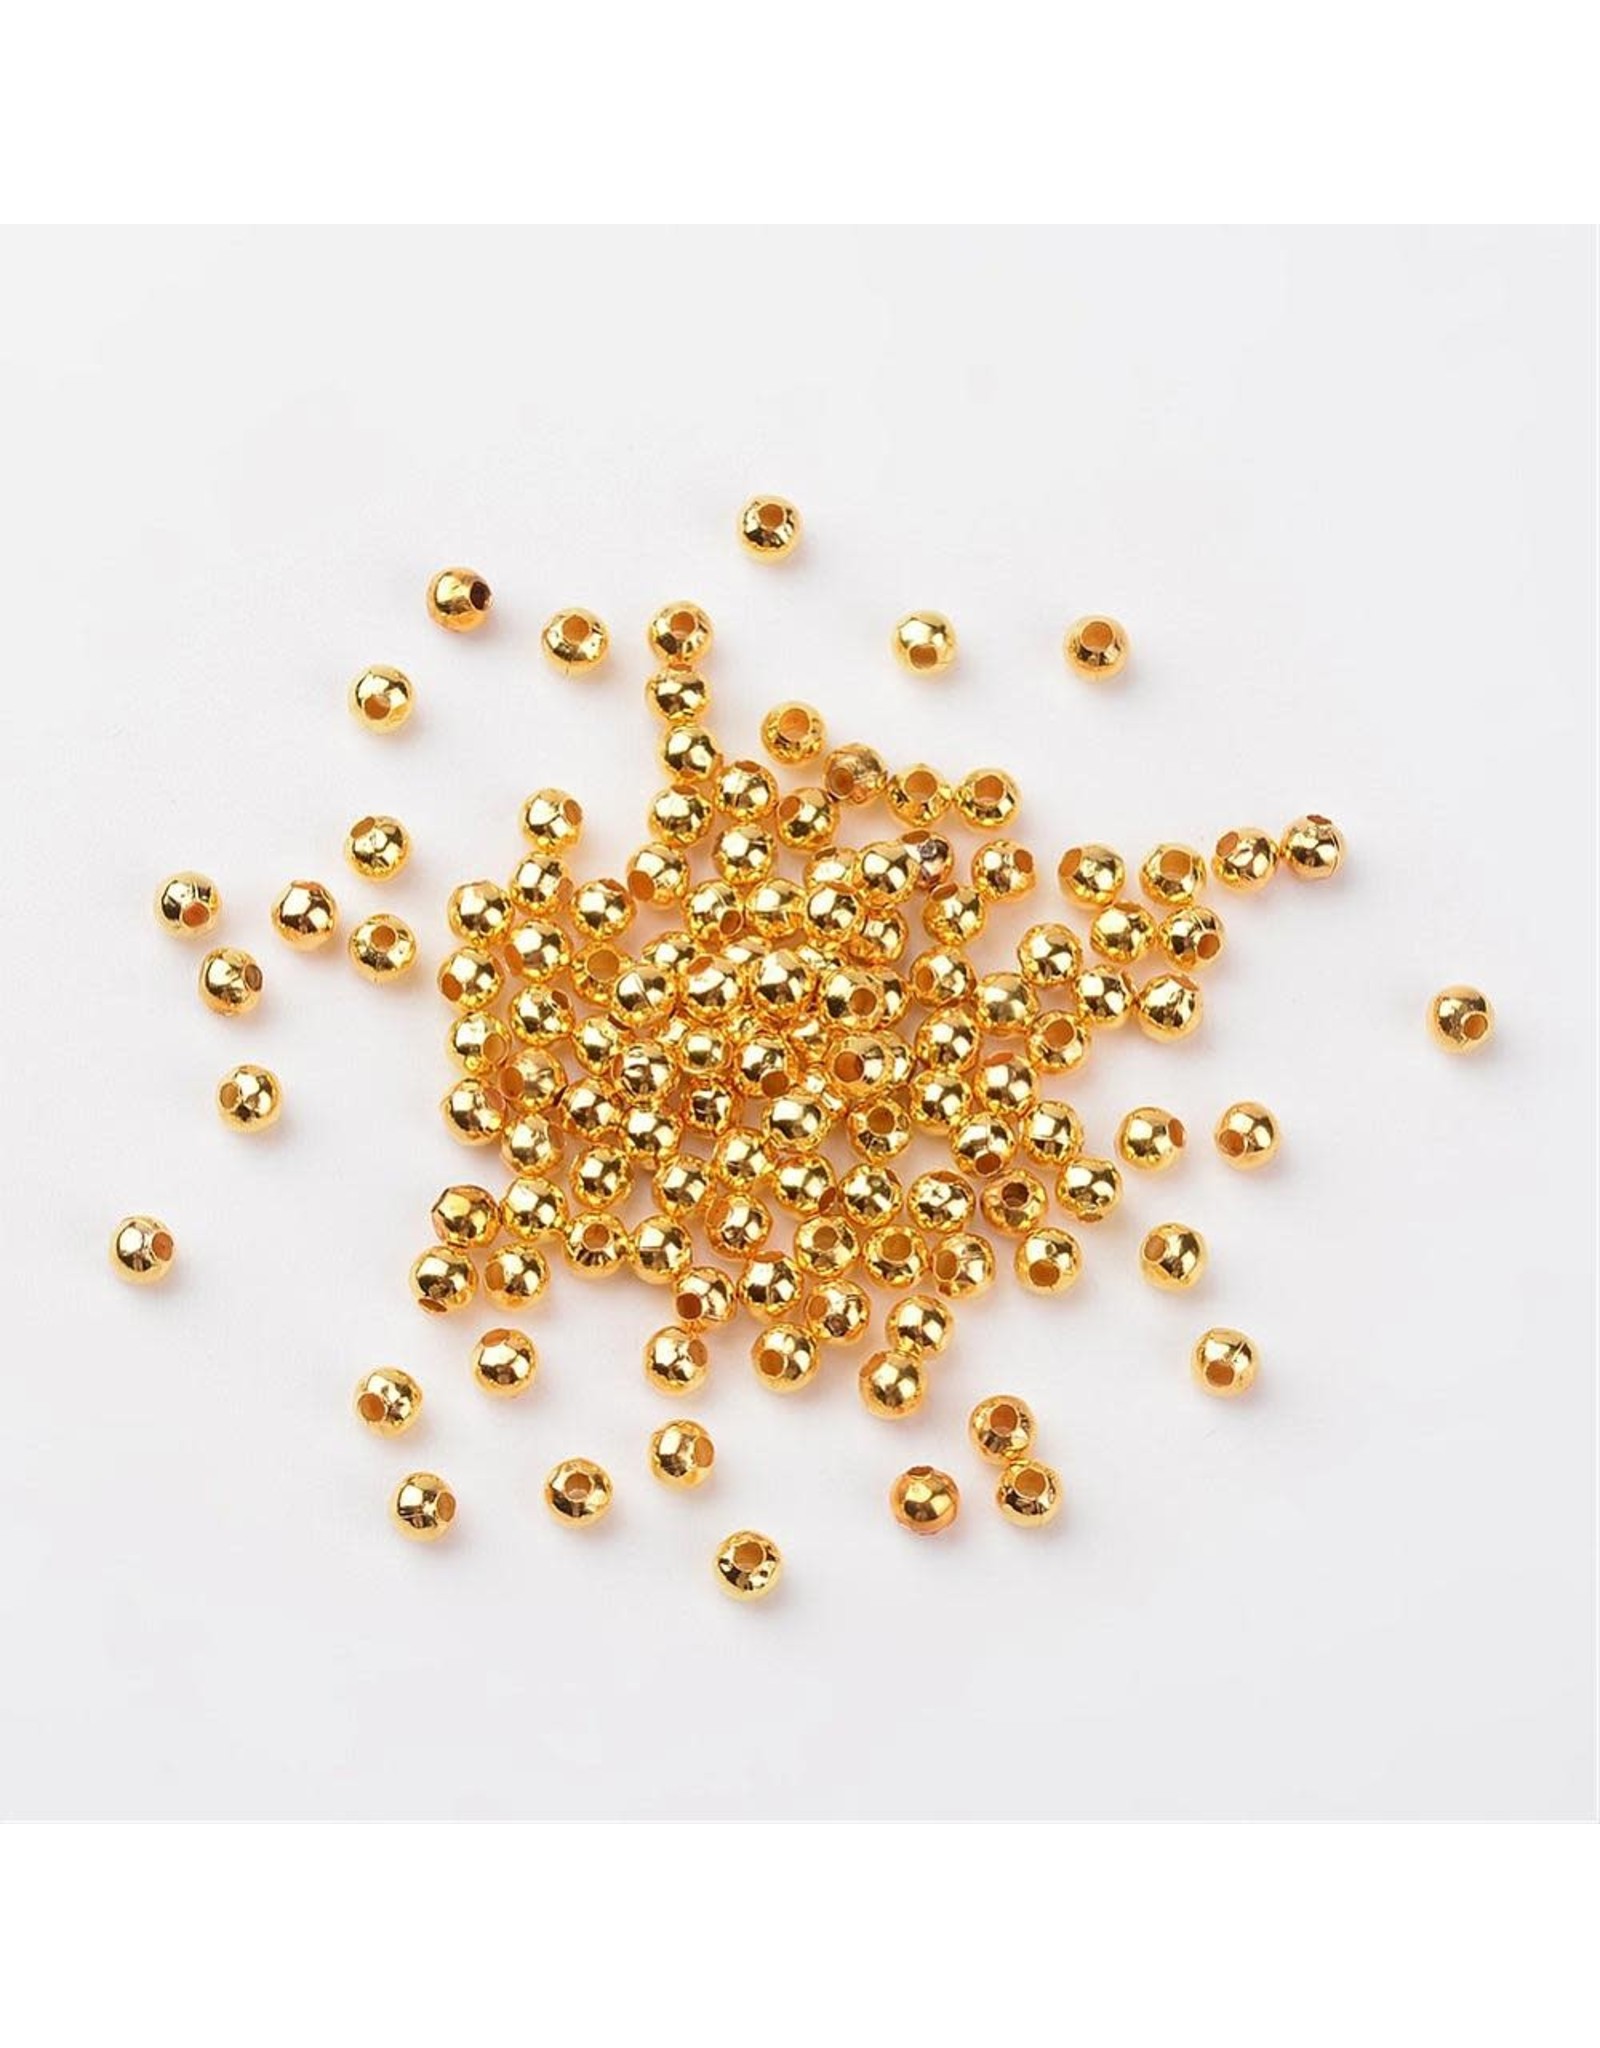 Round Gold Spacer Bead  4mm  x100